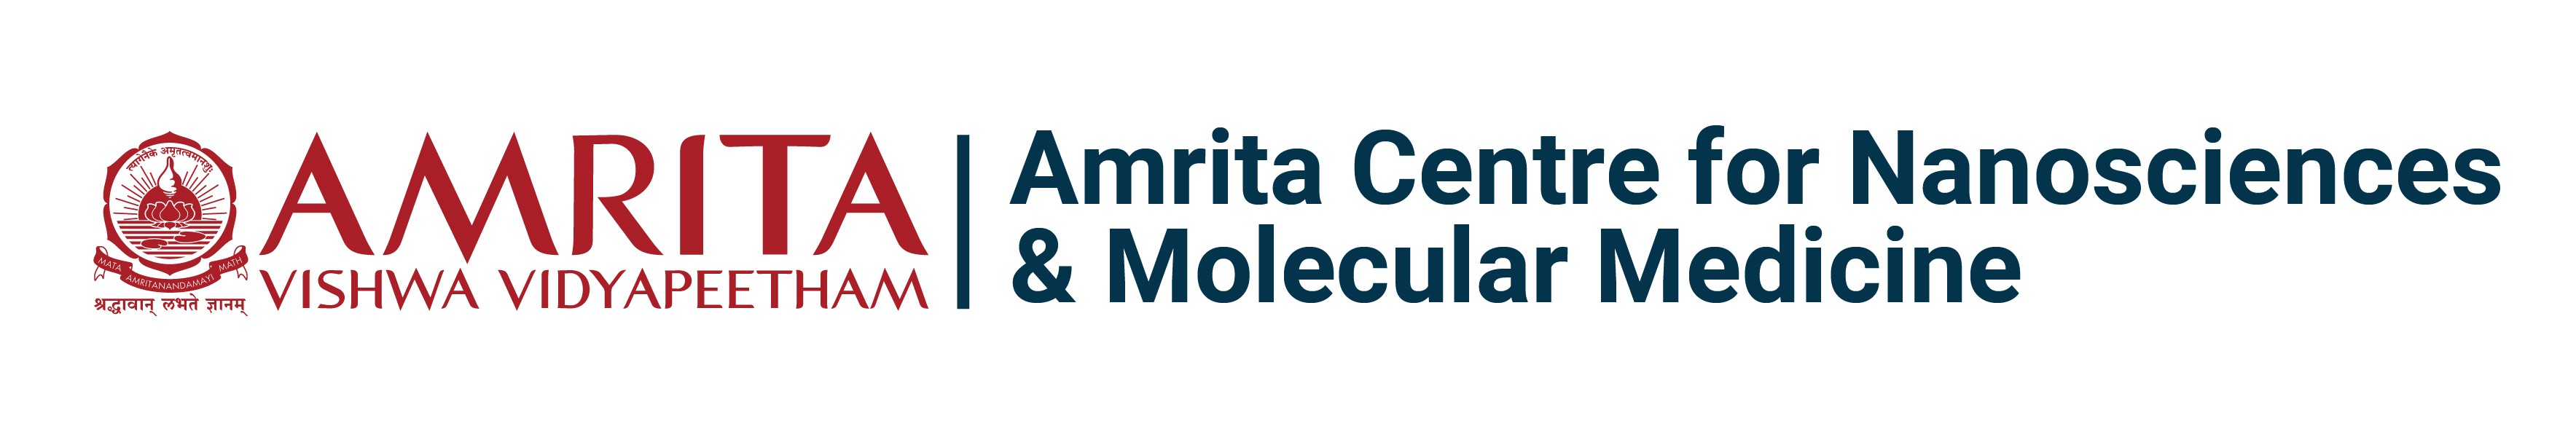 AMRITA CENTER FOR NANOSCIENCES AND MOLECULAR MEDICINE BAGS 7 NEW MEDICAL PATENTS INCLUDING TREATMENTS FOR MULTIPLE SCLEROSIS AND CANCER AND NEW MEDICAL IMPLANTS AND NANO CONTRAST AGENTS